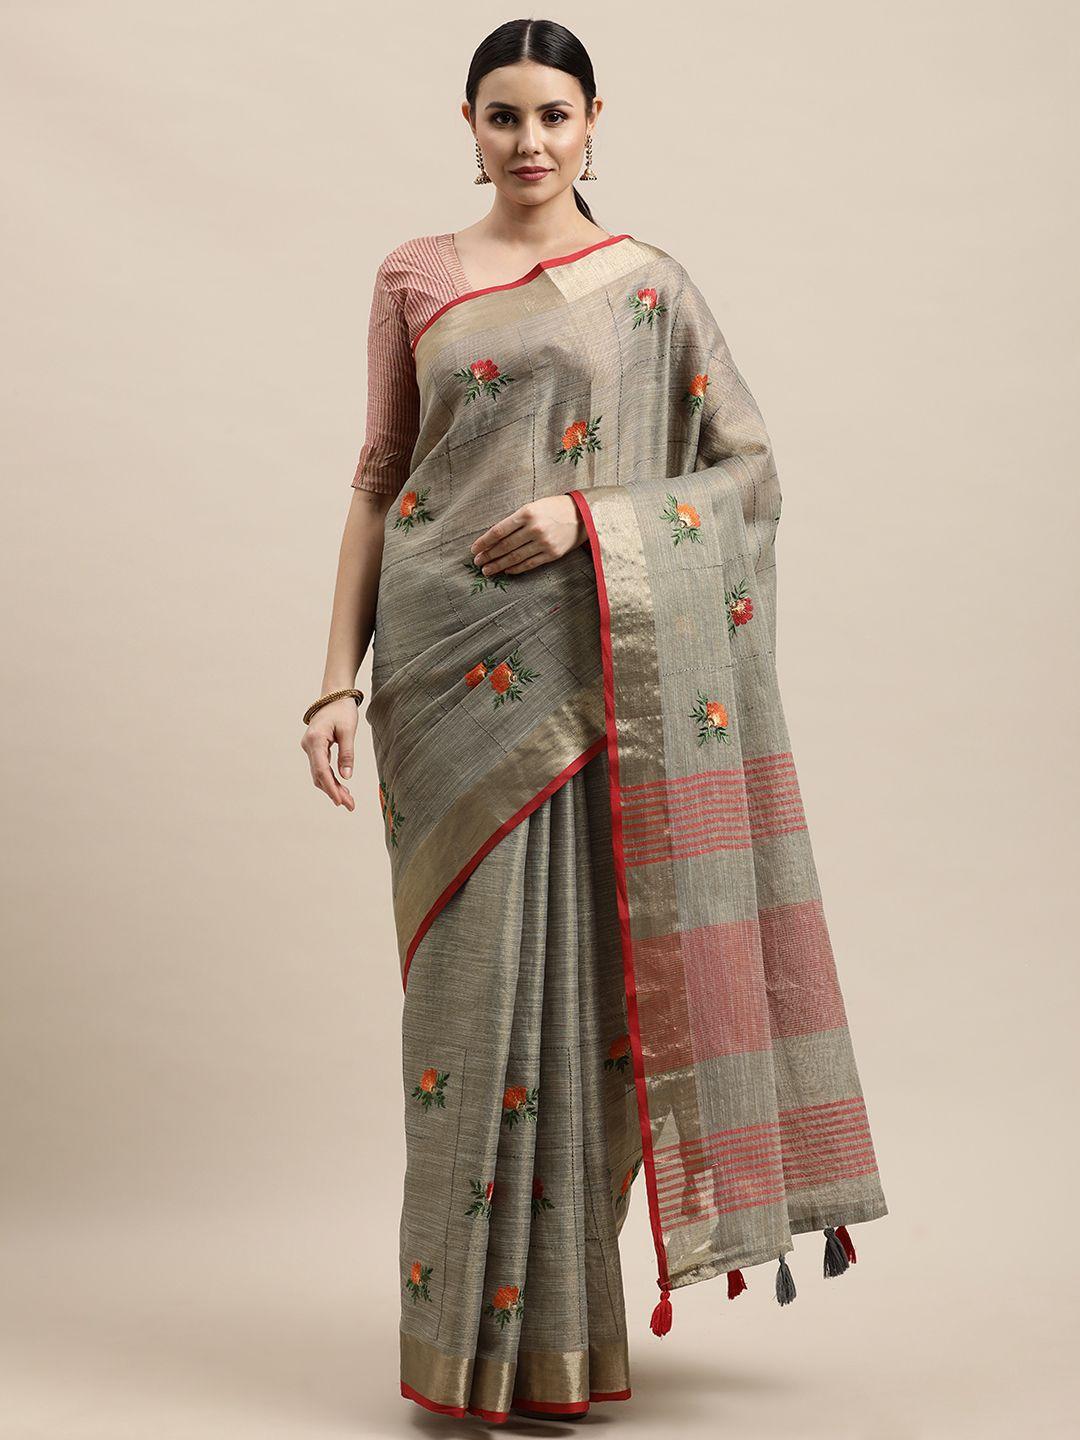 sangam prints grey & red ethnic embroidered linen blend saree